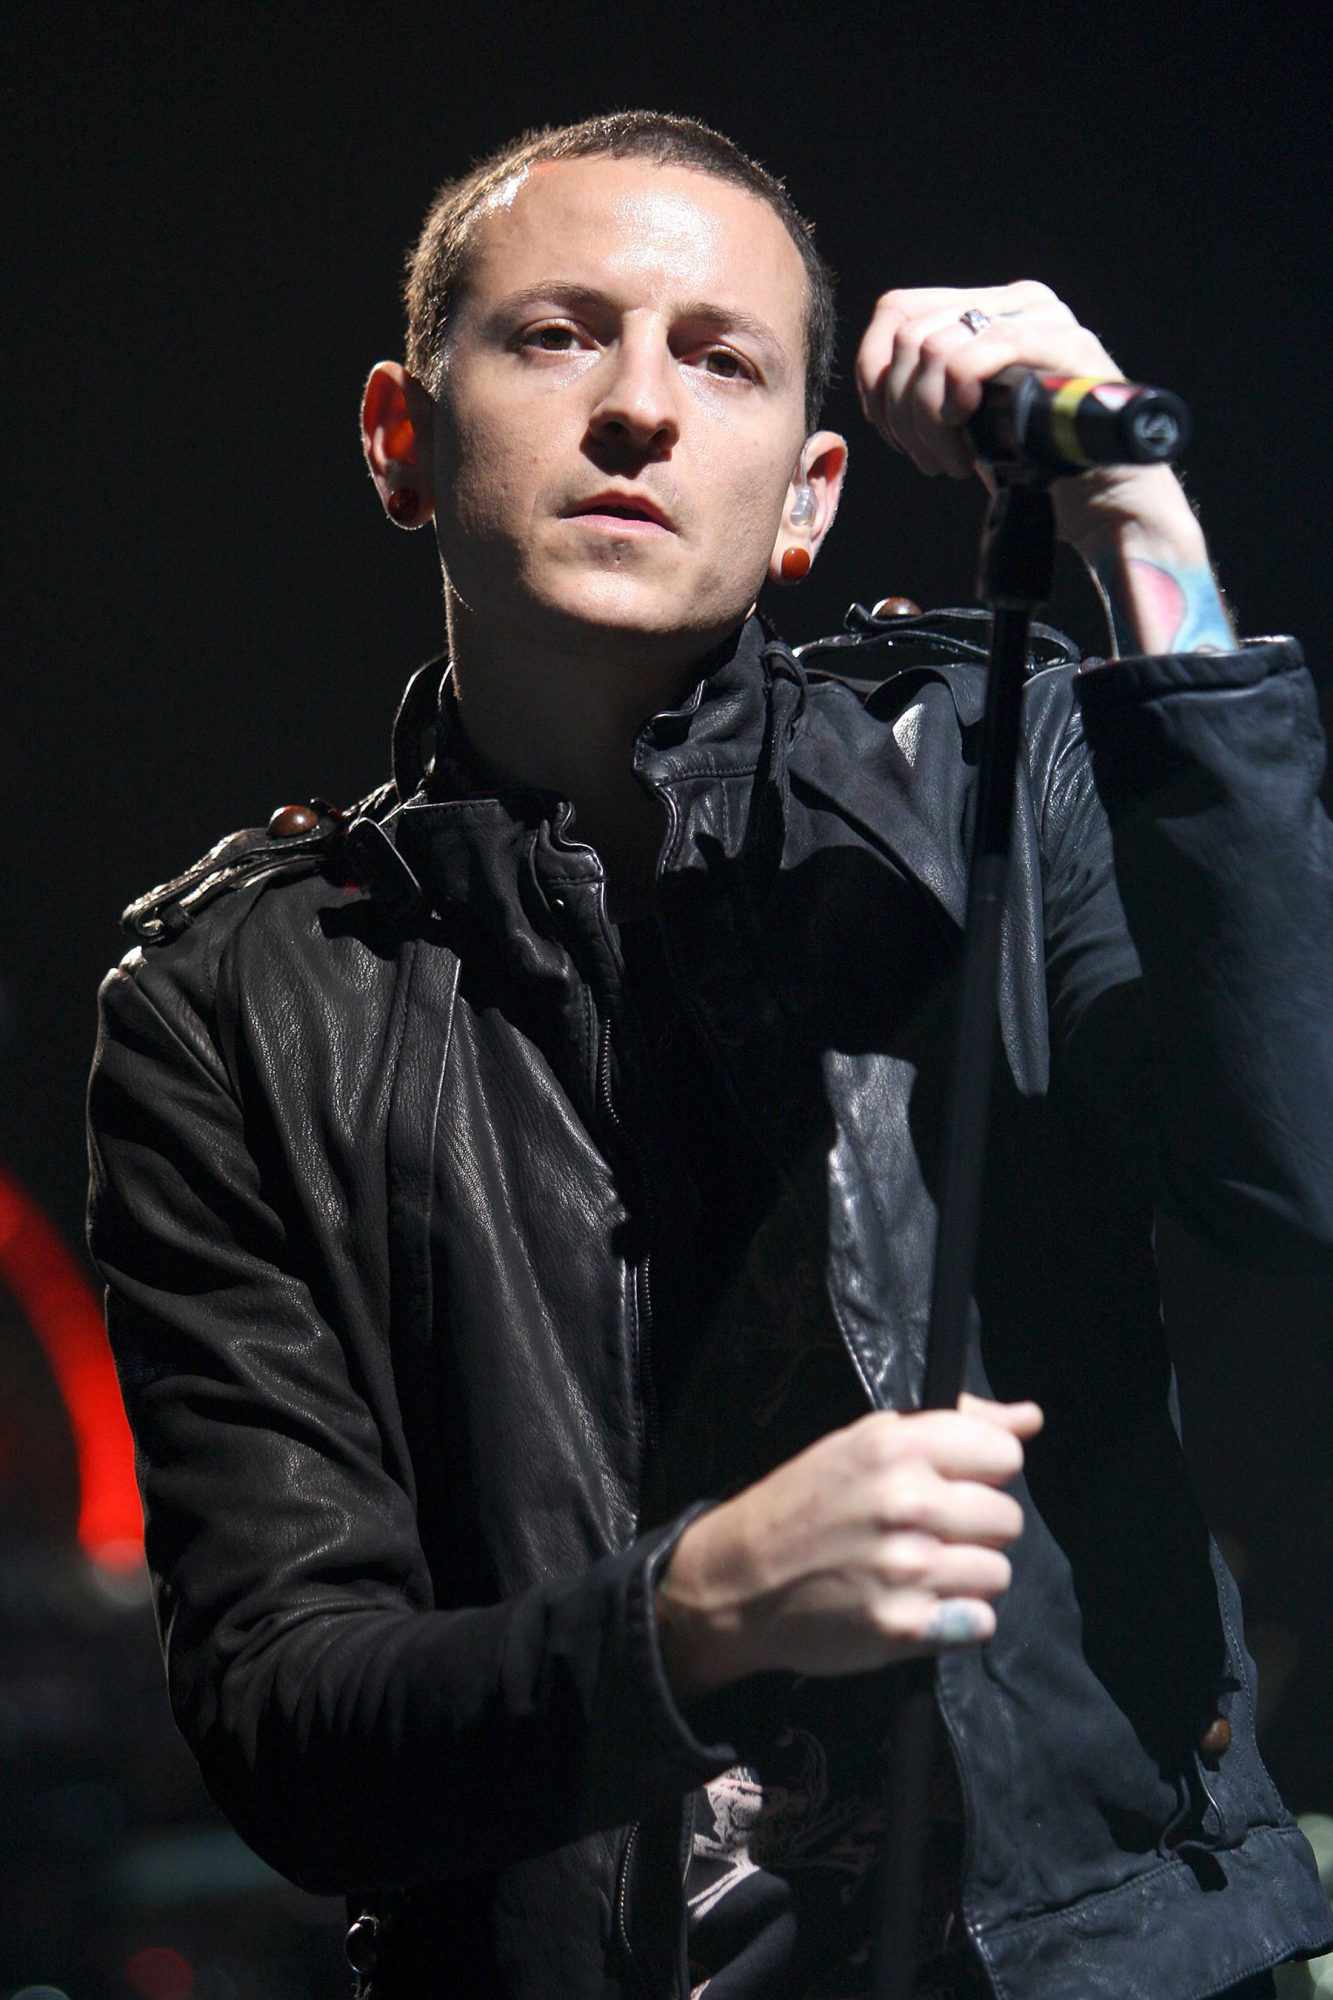 Chester Bennington onstage on March 4, 2008, at the Staples Center in Los Angeles